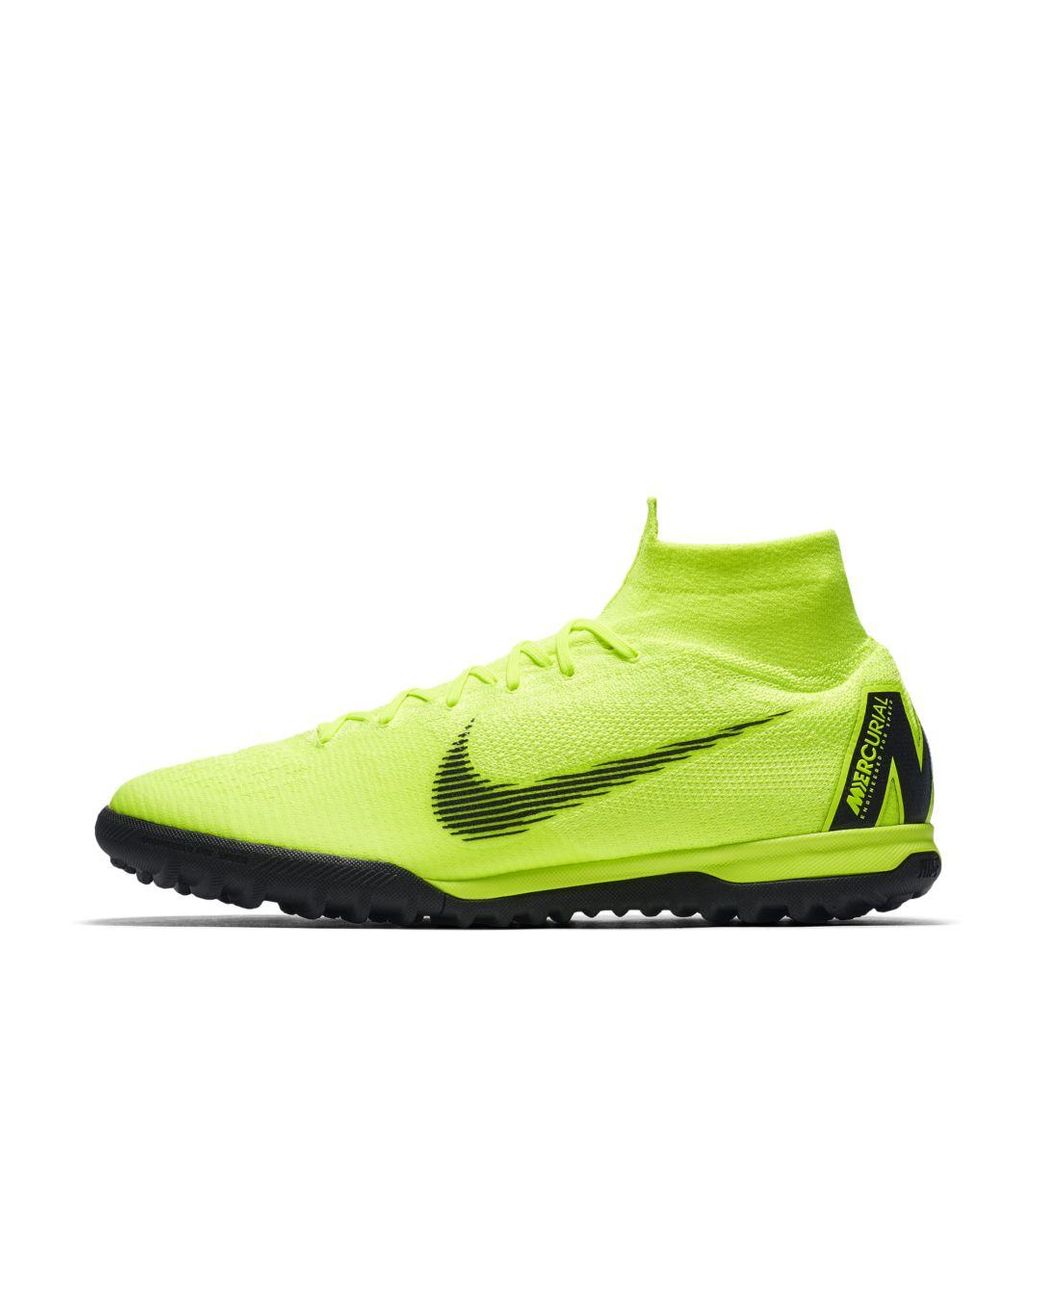 Nike Synthetic Superflyx 6 Elite Tf Artificial-turf Soccer Cleat in ...